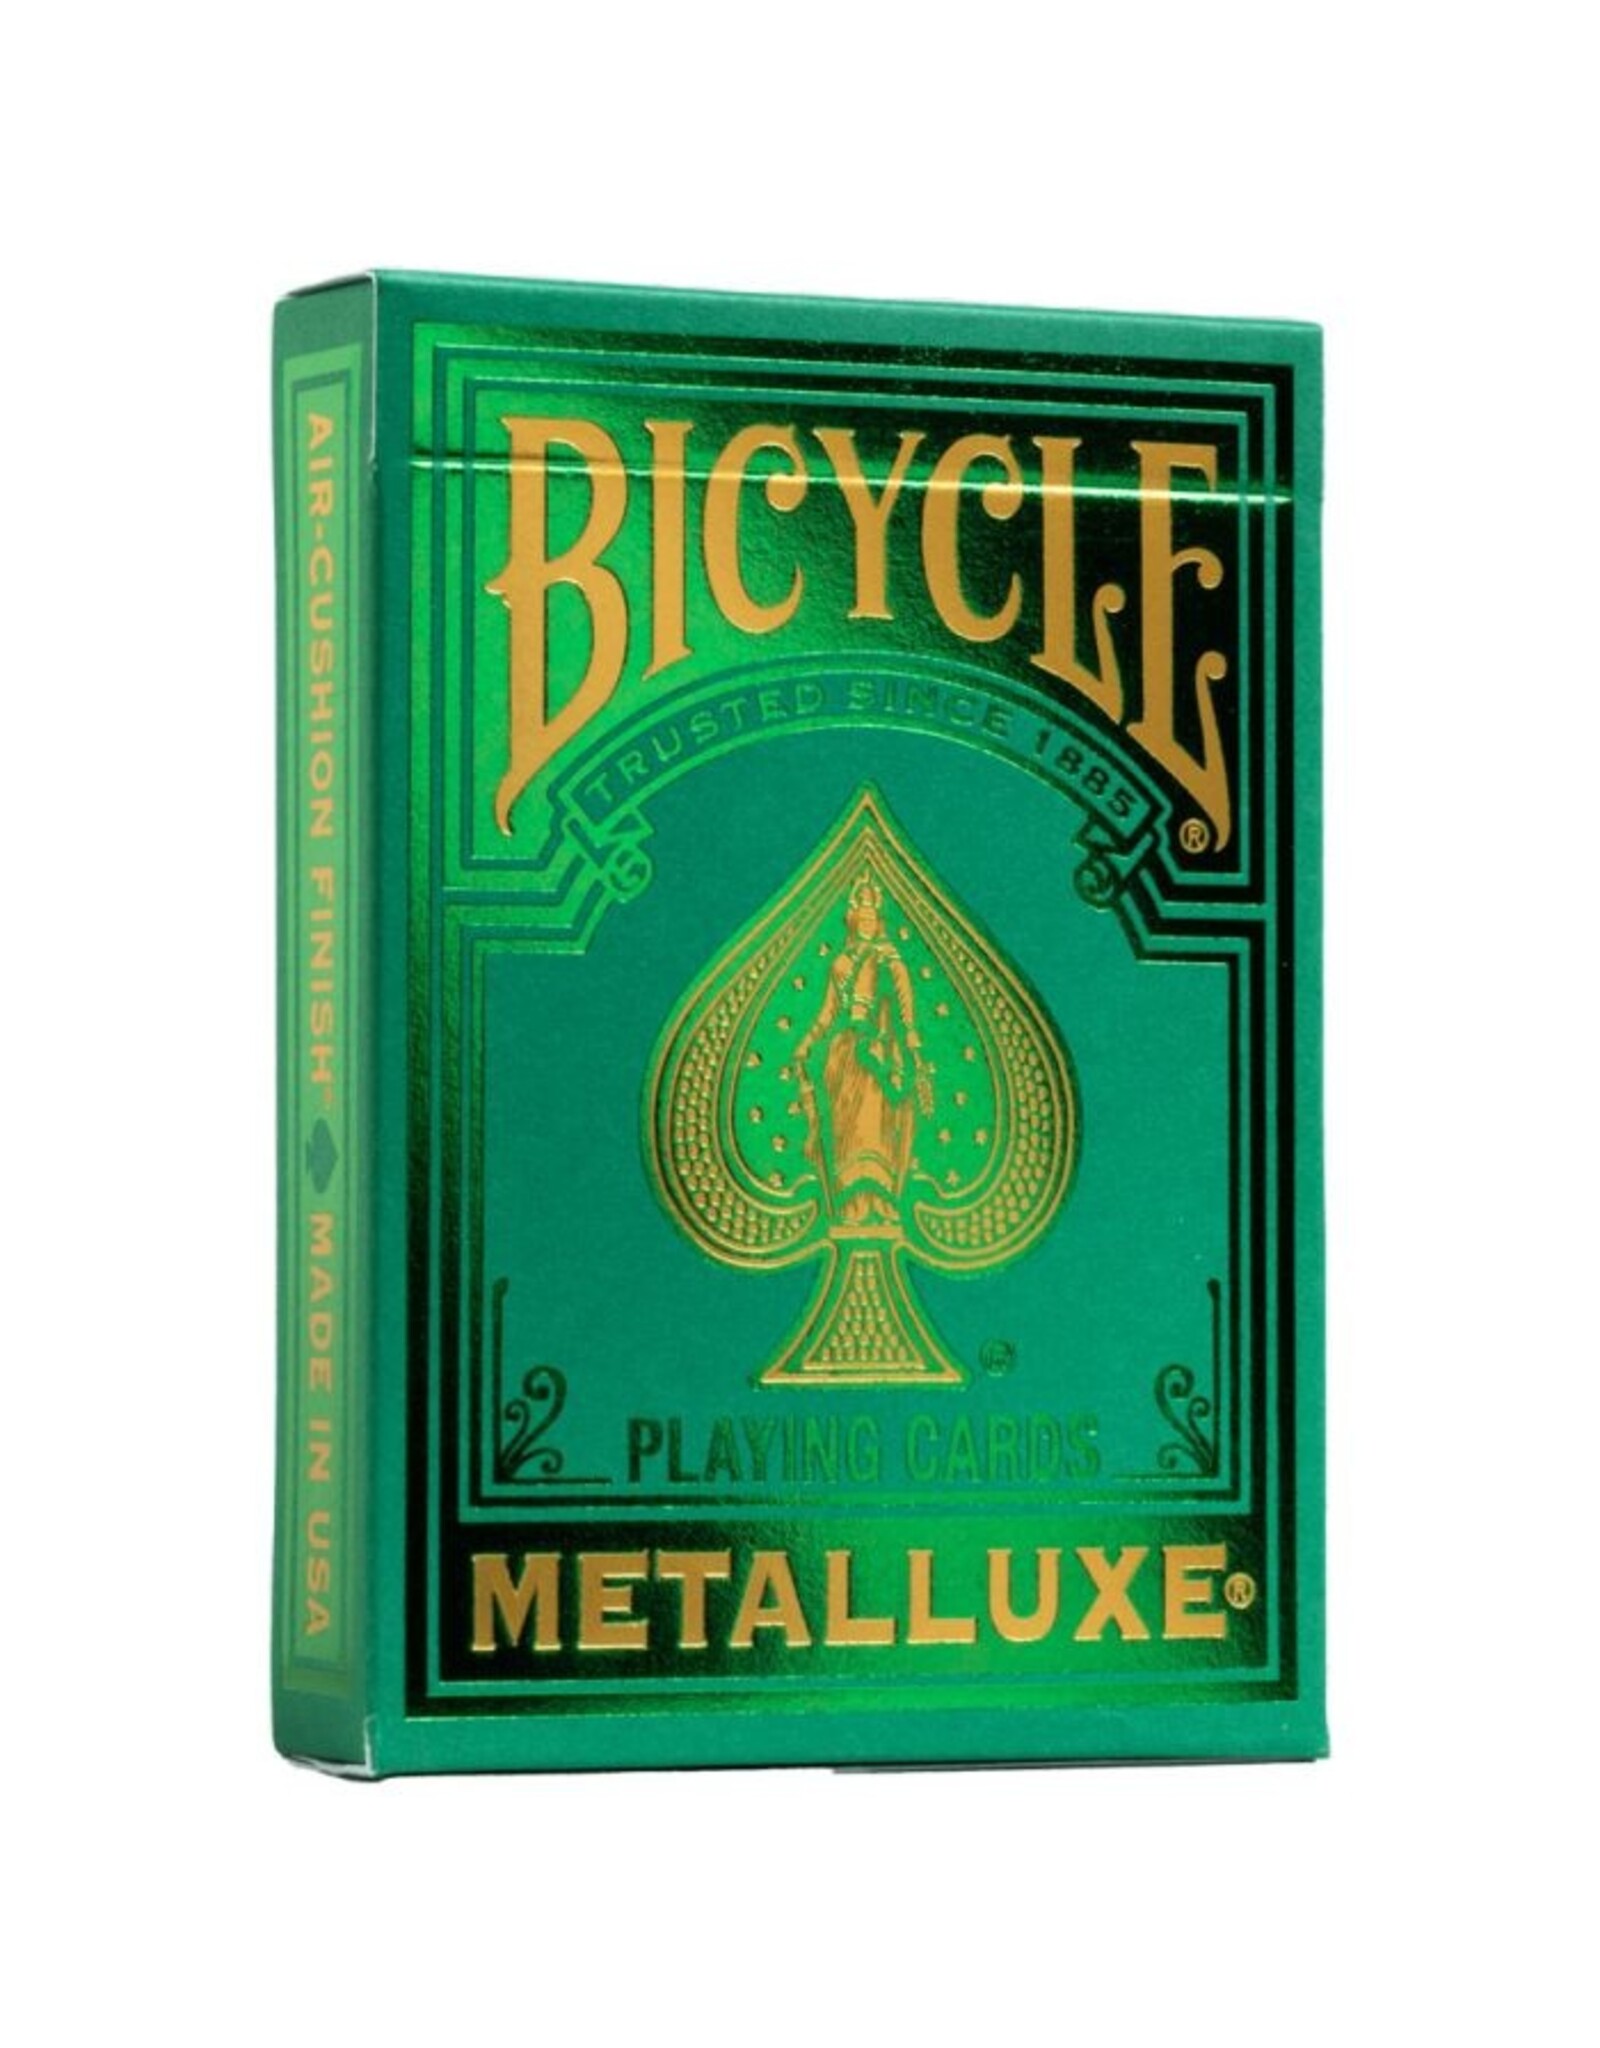 Bicycle Playing Cards: Bicycle: Metalluxe Green